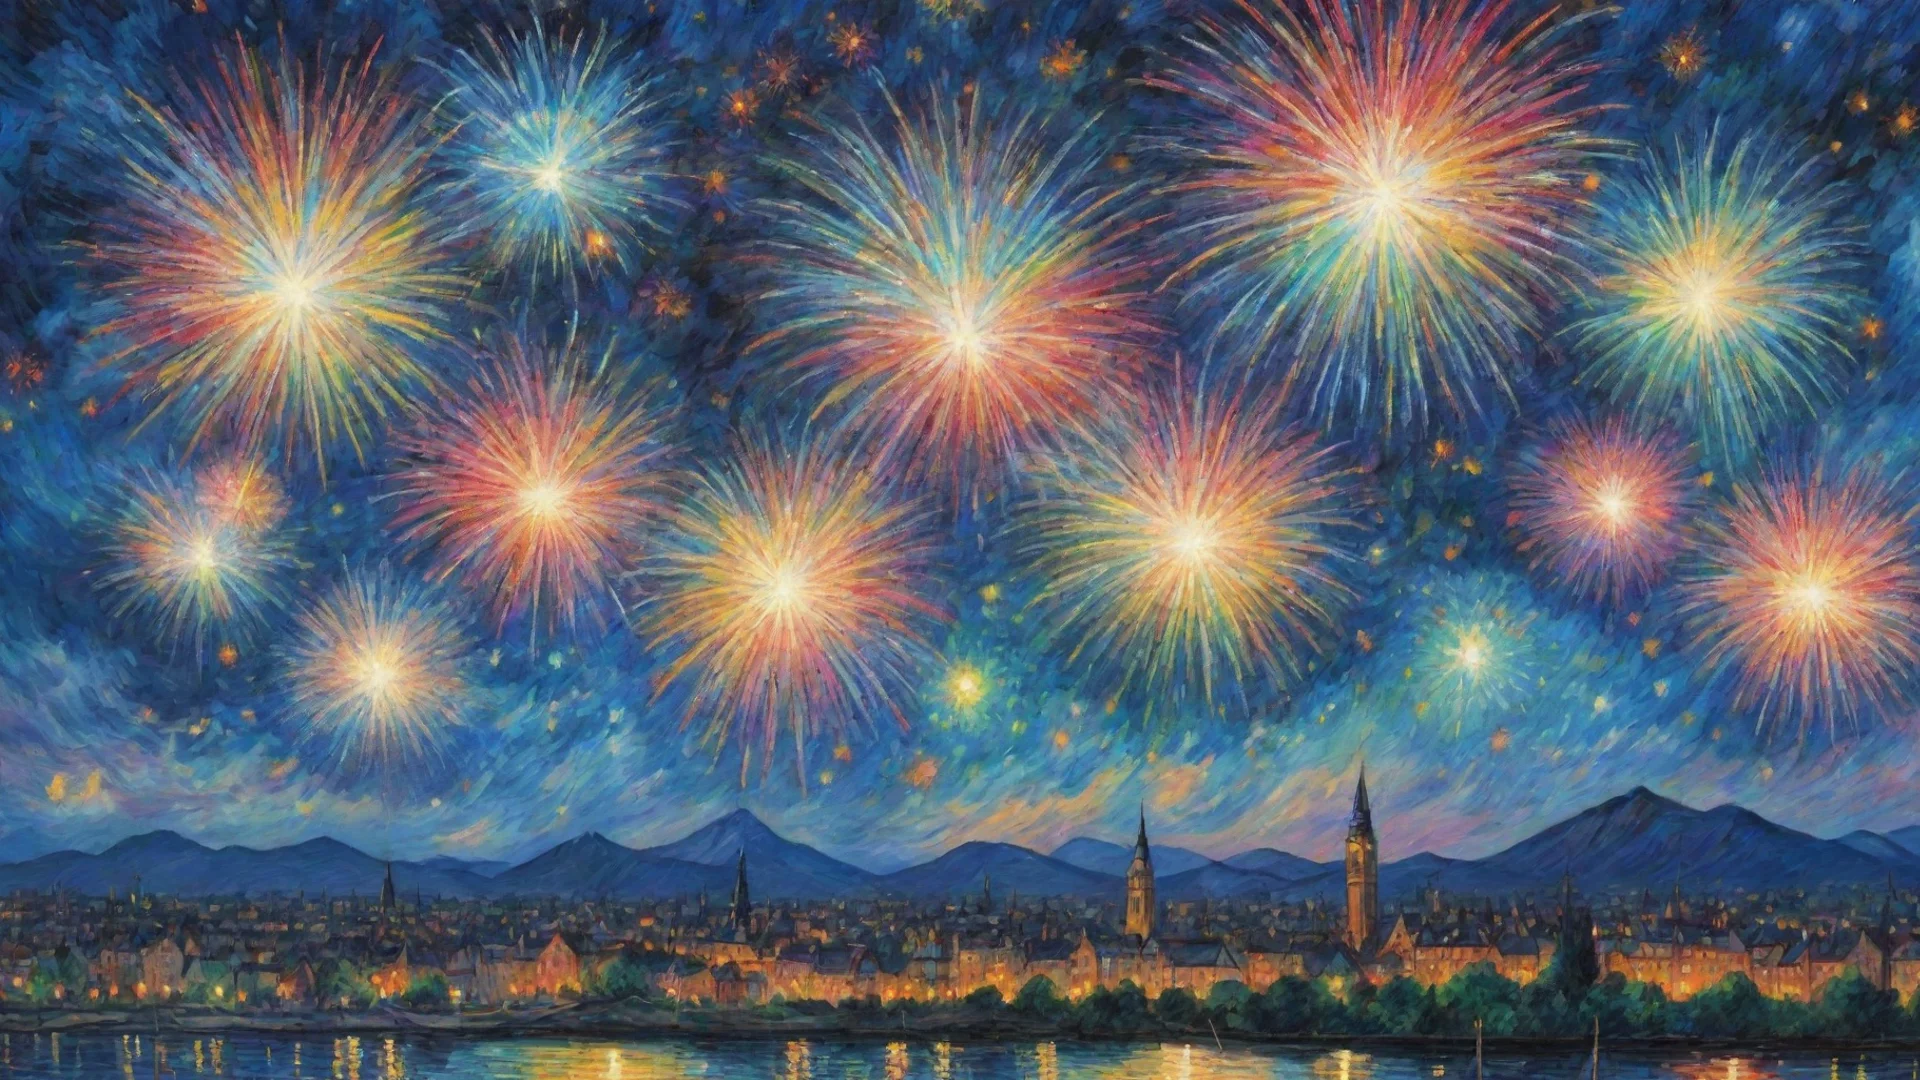 aiamazing fireworks in sky epic lovely artistic ghibli van gogh happyness bliss peace  detailed asthetic awesome portrait 2 wide